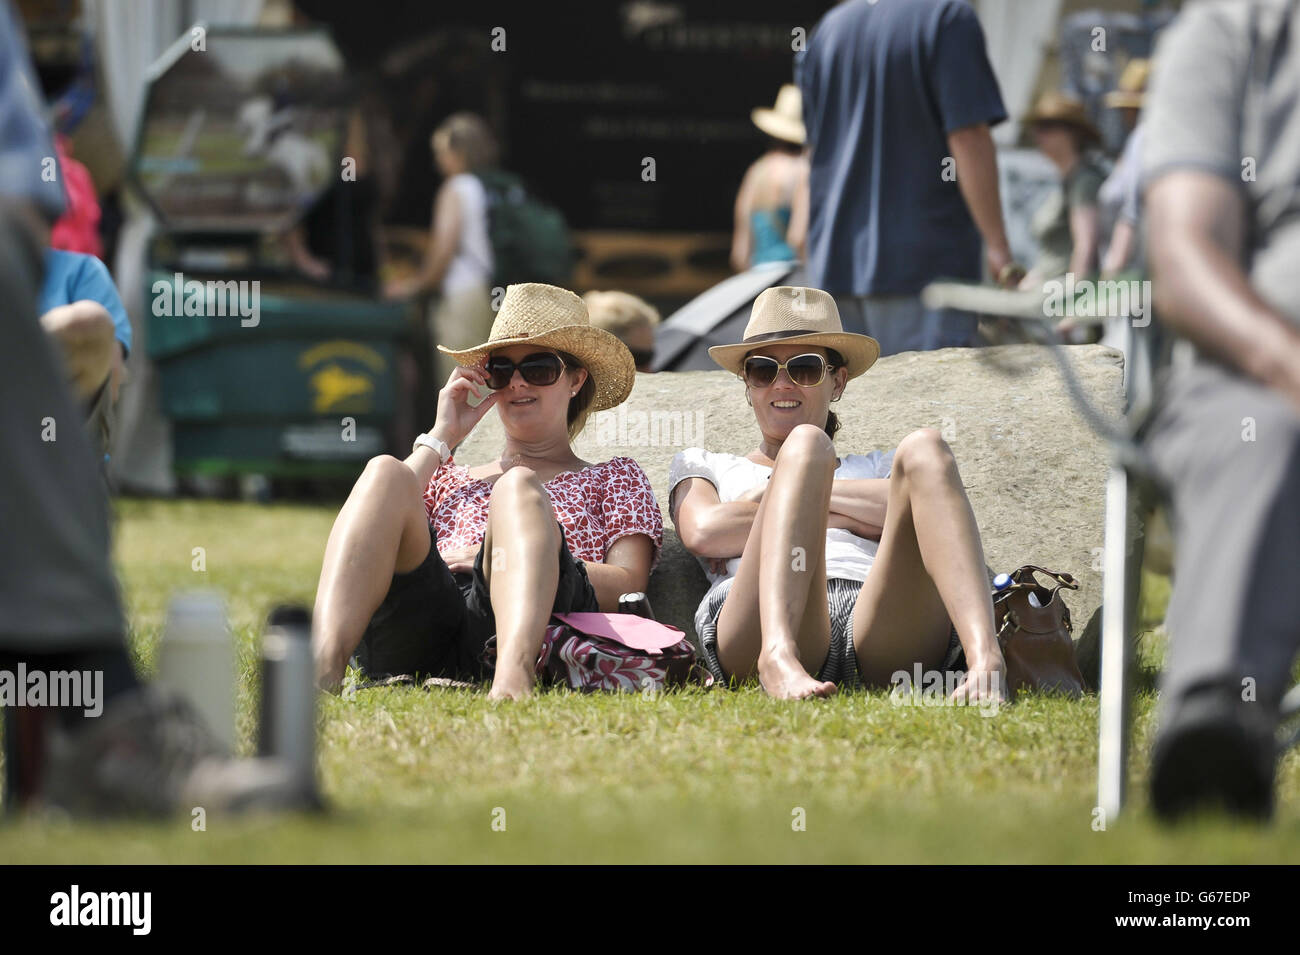 Equestrian fans enjoy the hot sunshine during day four of the Barbury International Horse Trials at Barbury Castle, Wiltshire. Stock Photo